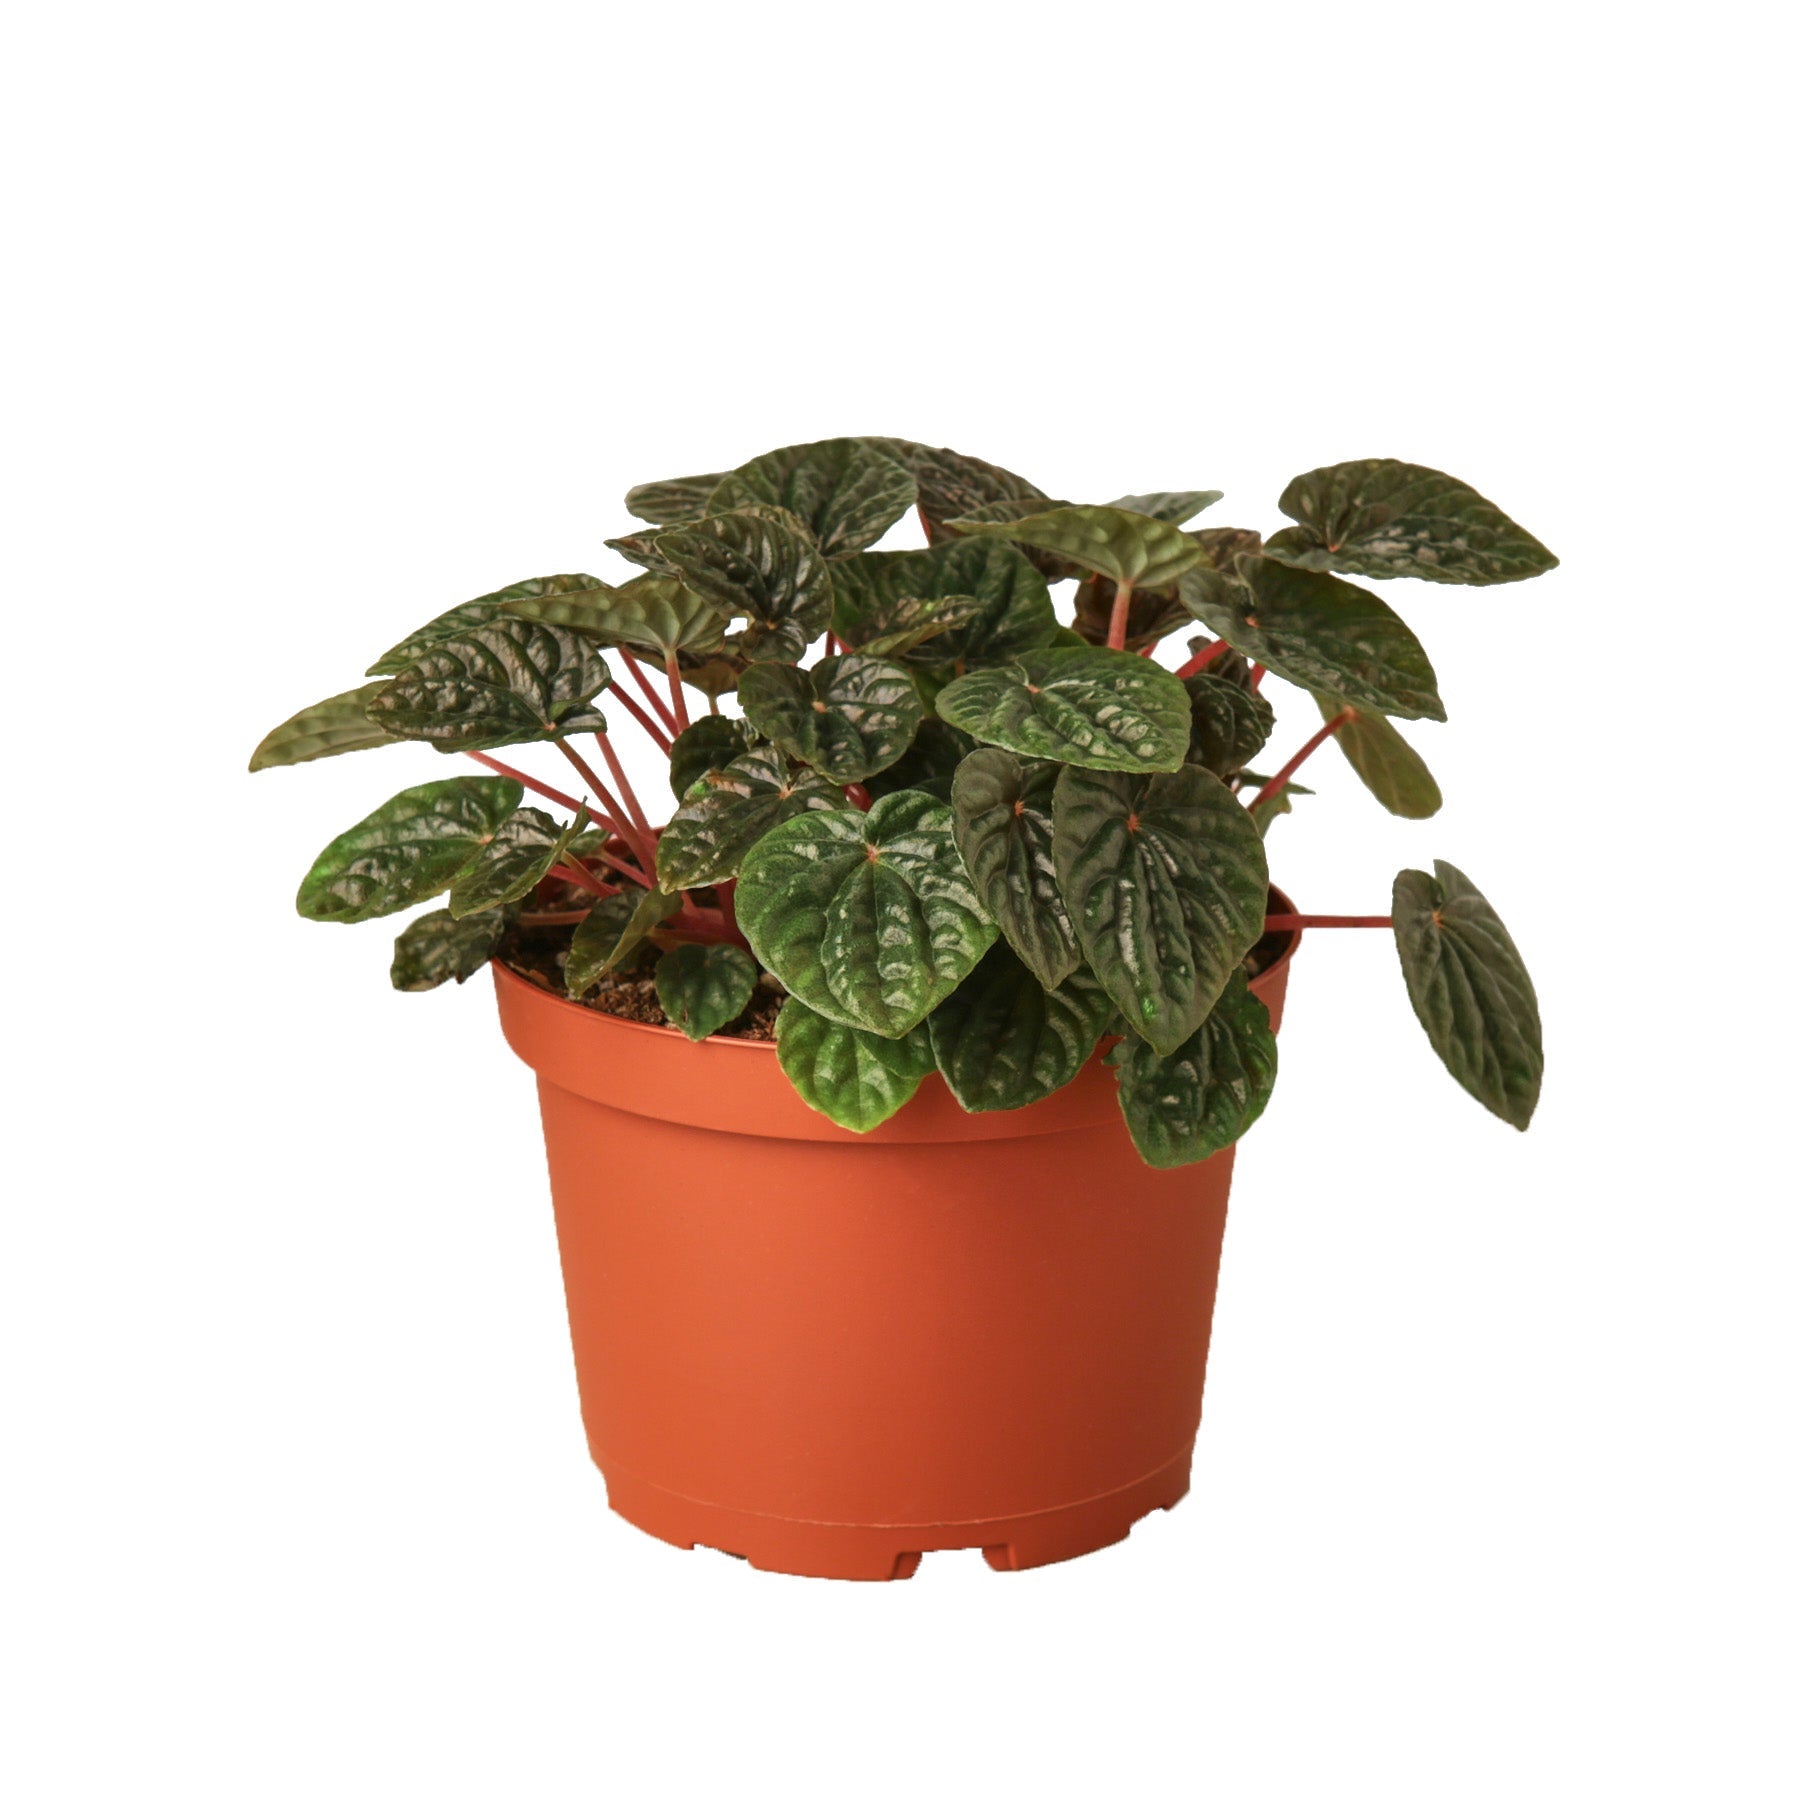 Peperomia 'Ripple Red' - 6" Pot - NURSERY POT ONLY - One Beleaf Away Plant Studio